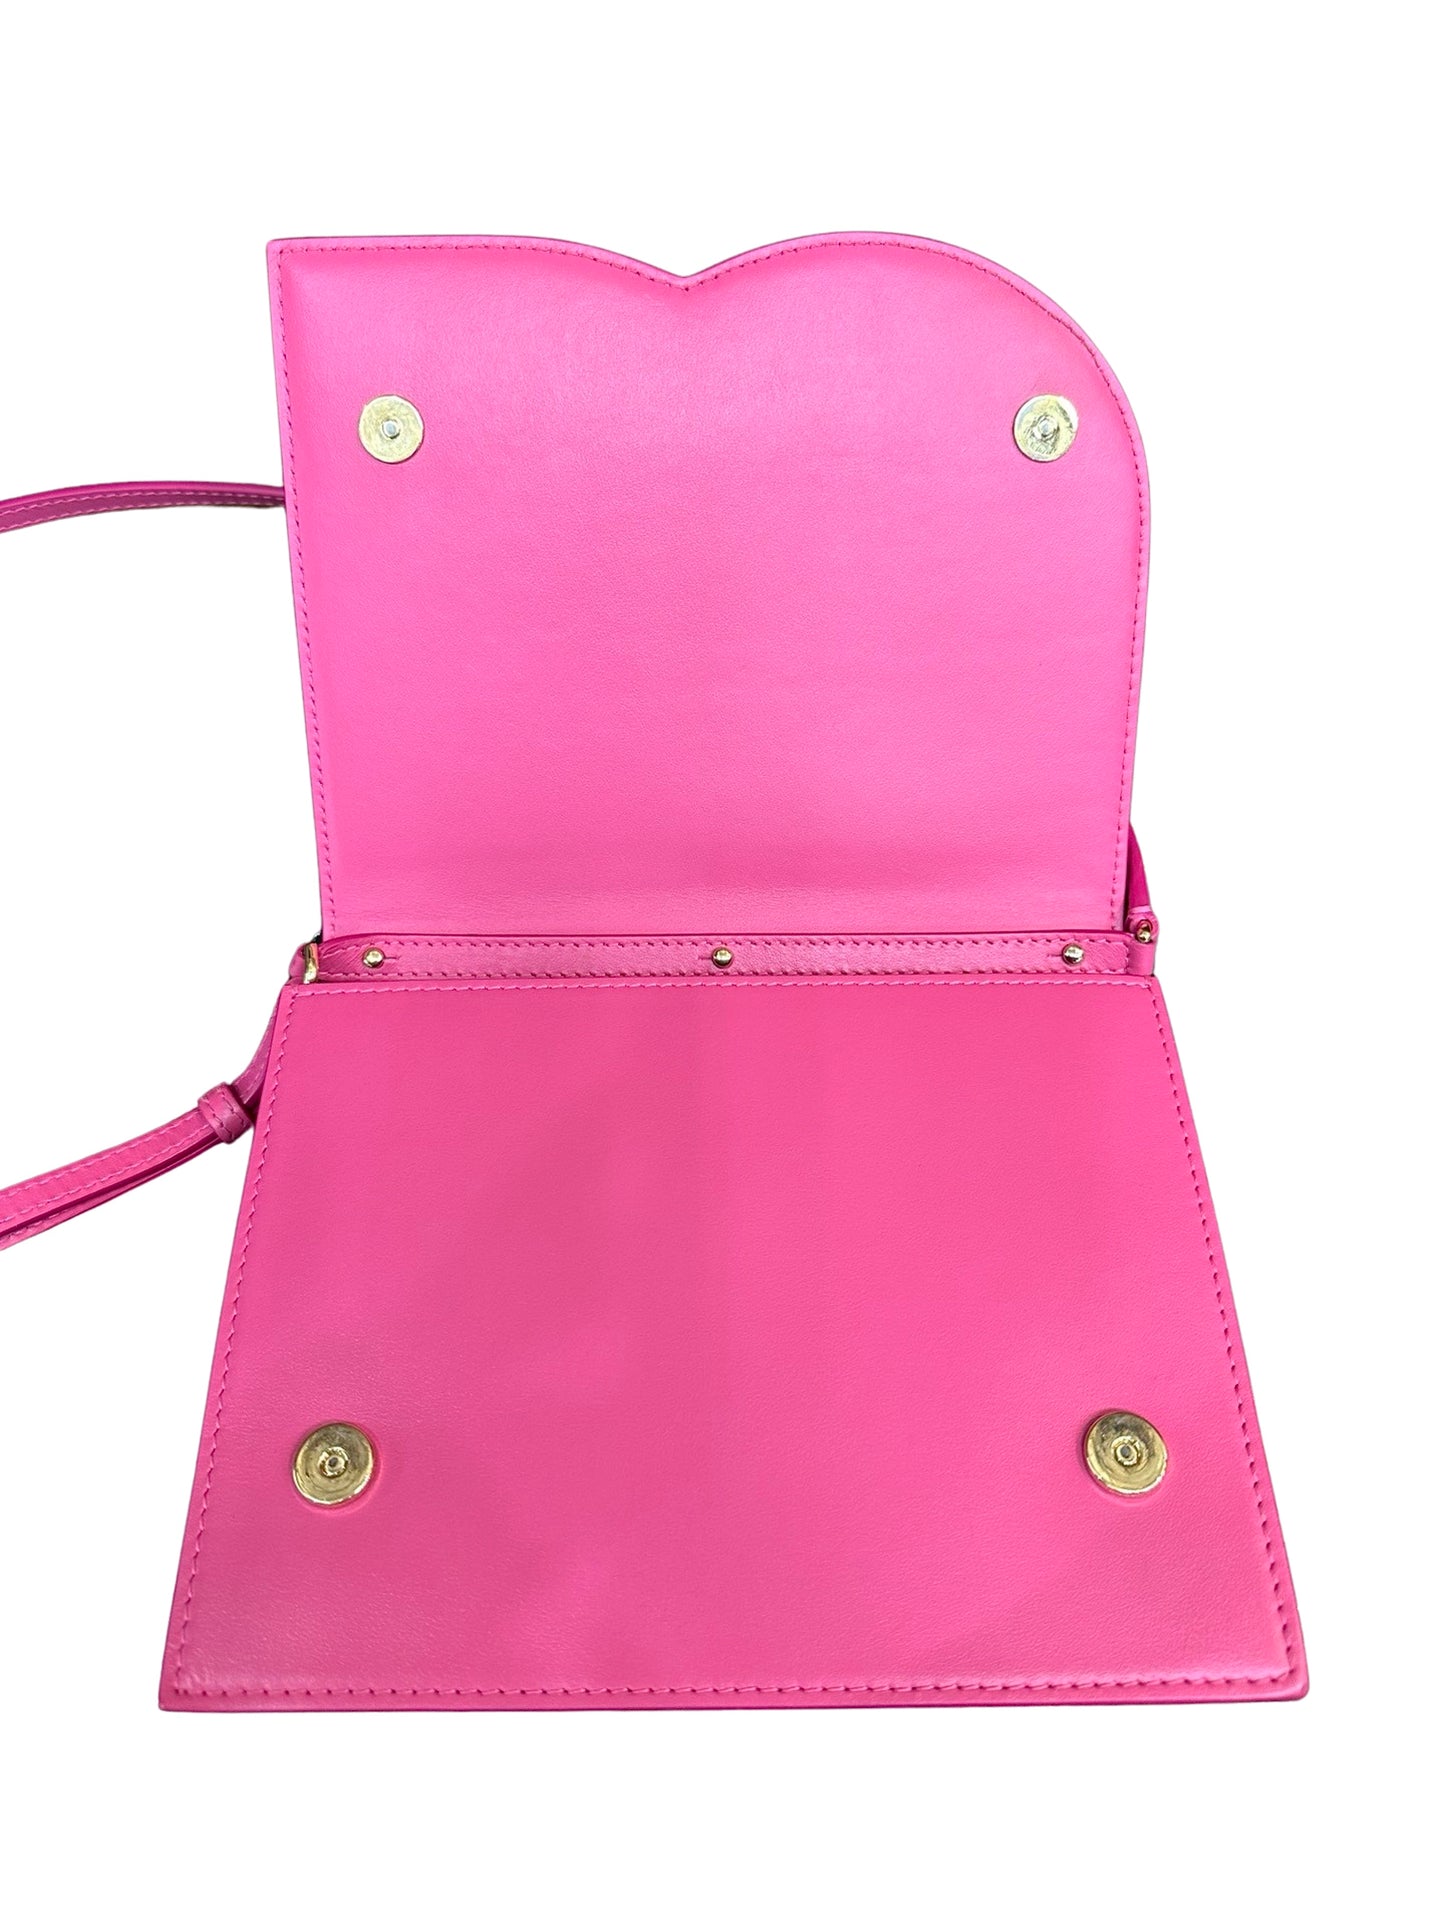 Photo of pink bag with flap open